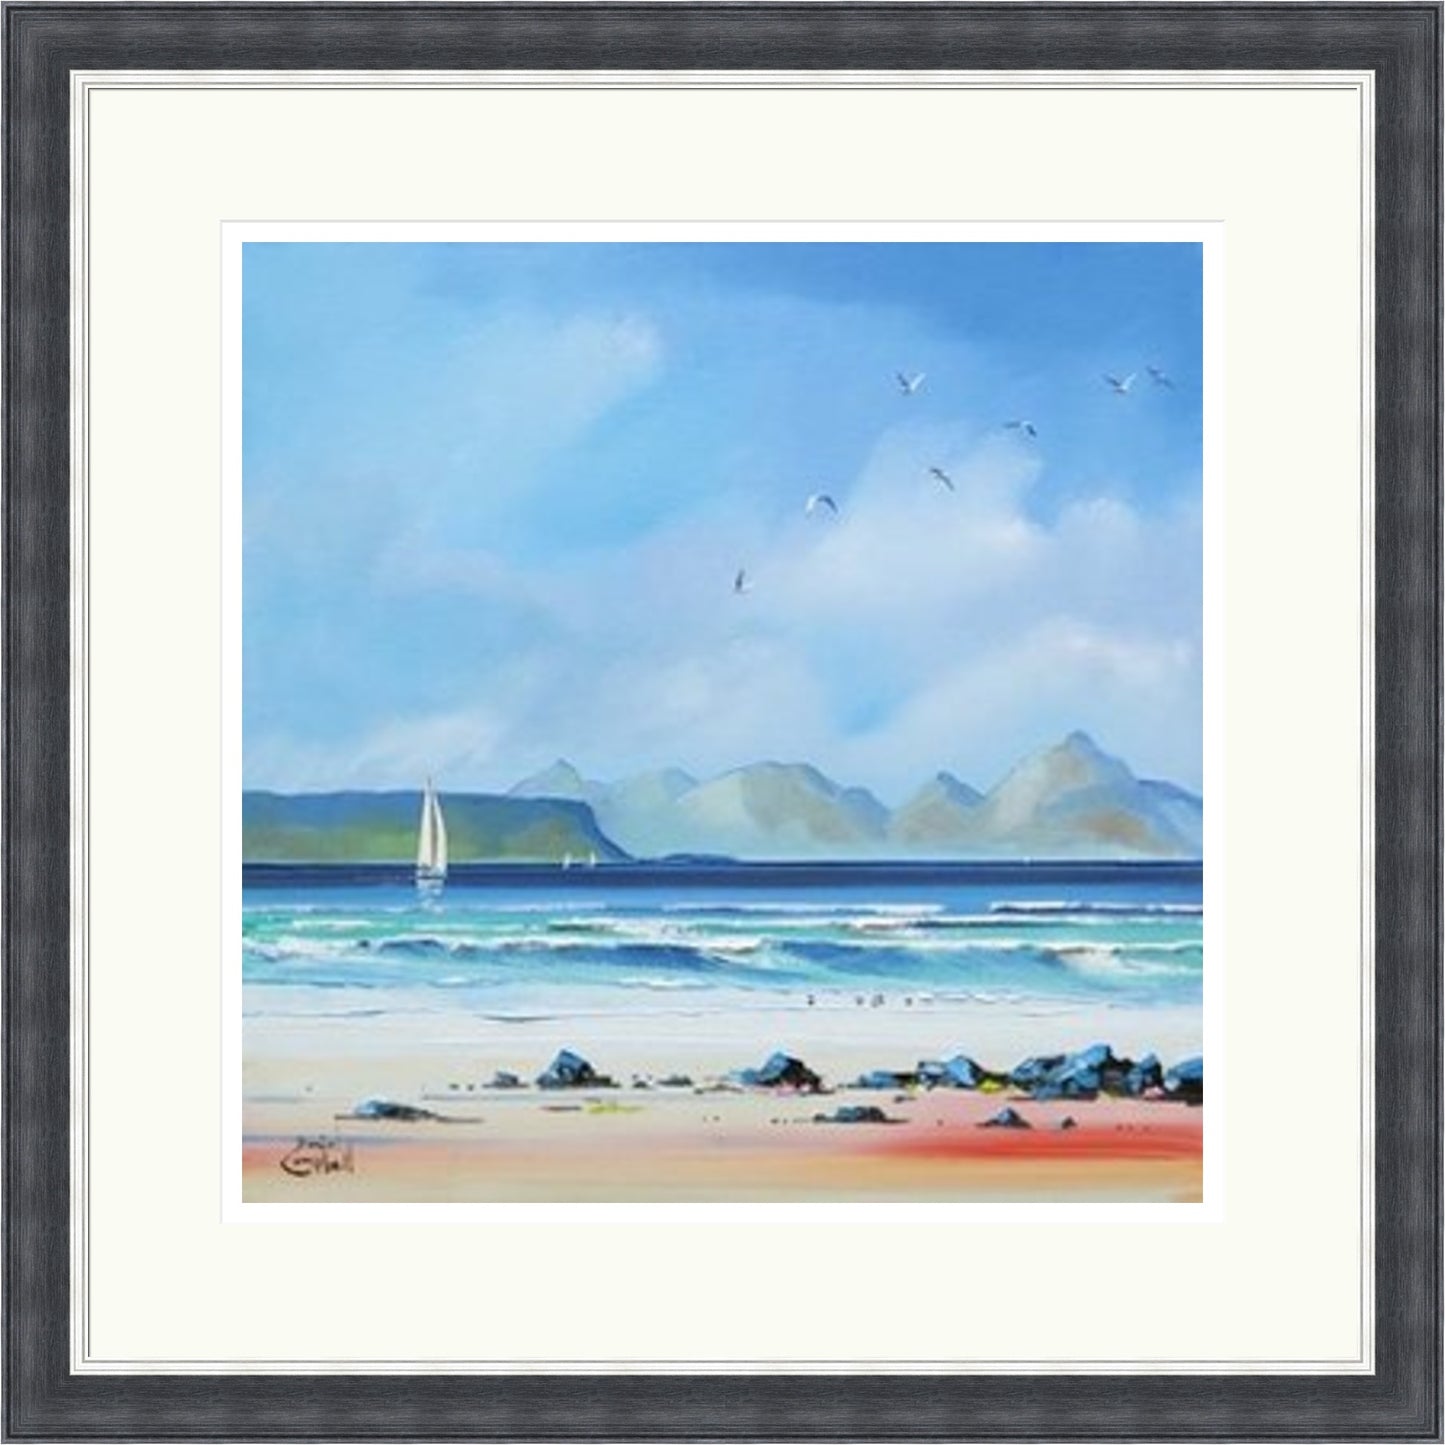 Sailing by Eigg by Daniel Campbell